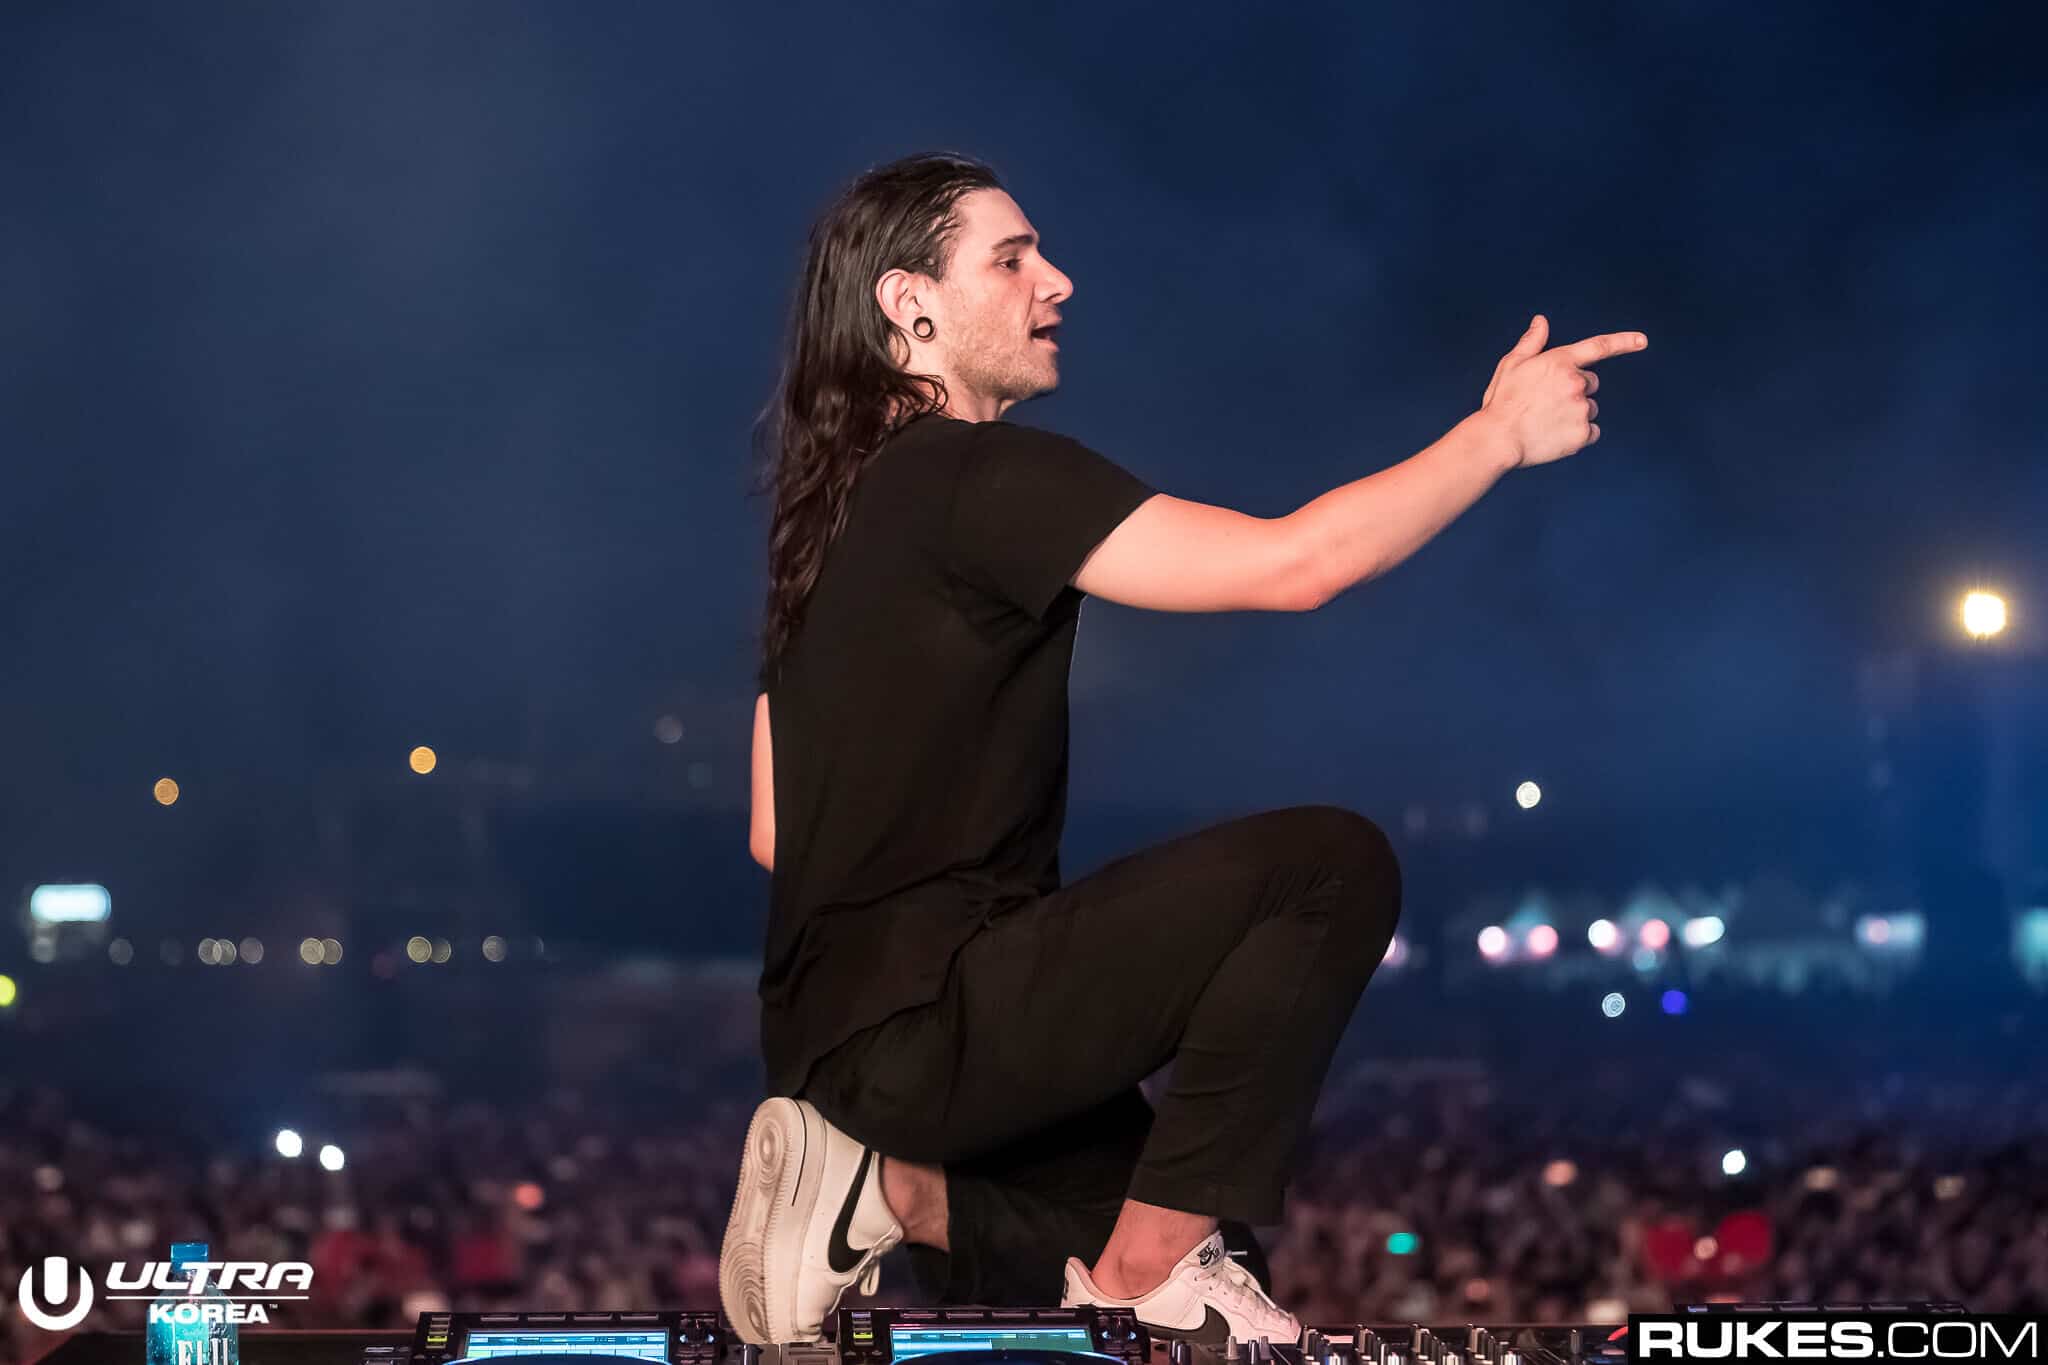 Skrillex teases upcoming album release for this year